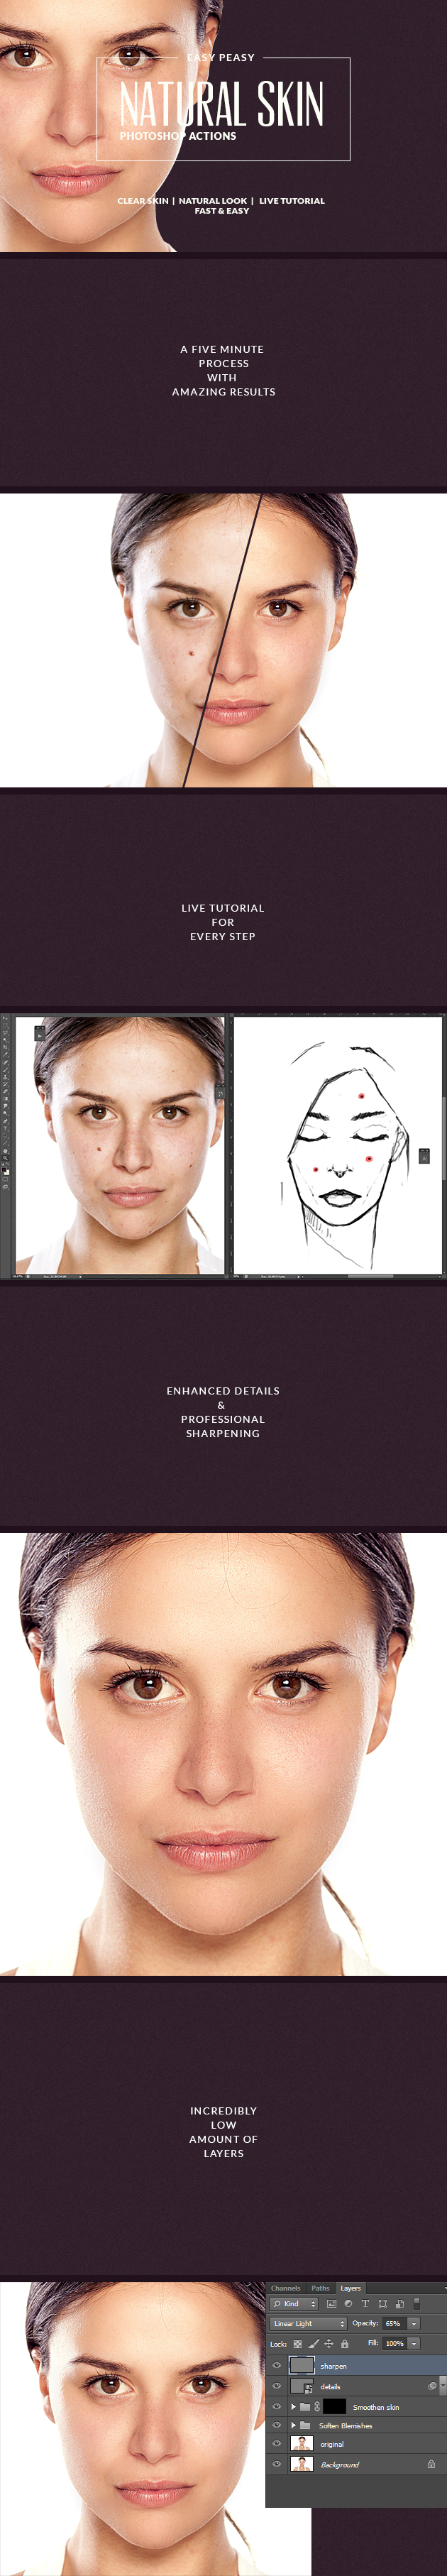 Get Flawless Skin with these Revolutionary Natural Skin PS Actions - Featured Lorelei Web Design